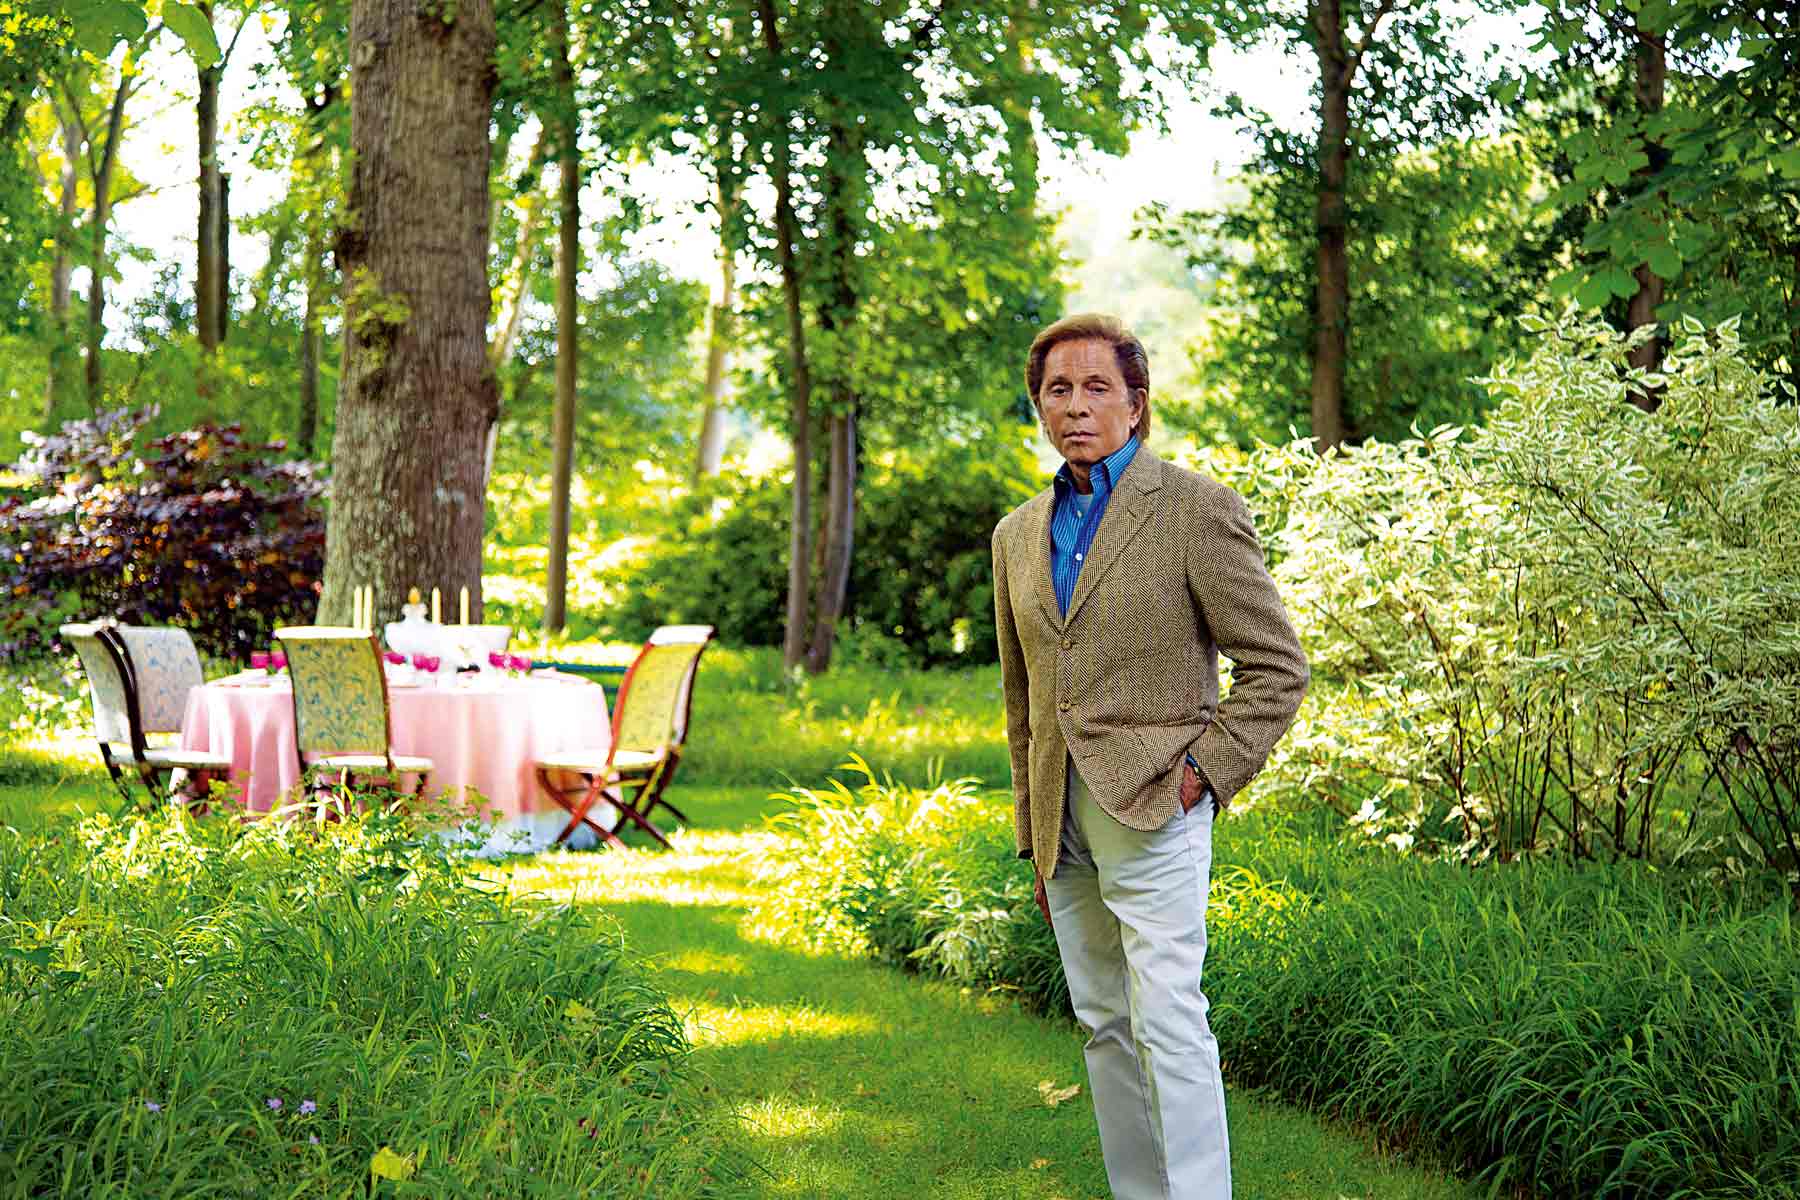 Wideville, Valentino invites his guests to his gracious table set for afternoon tea in the garden